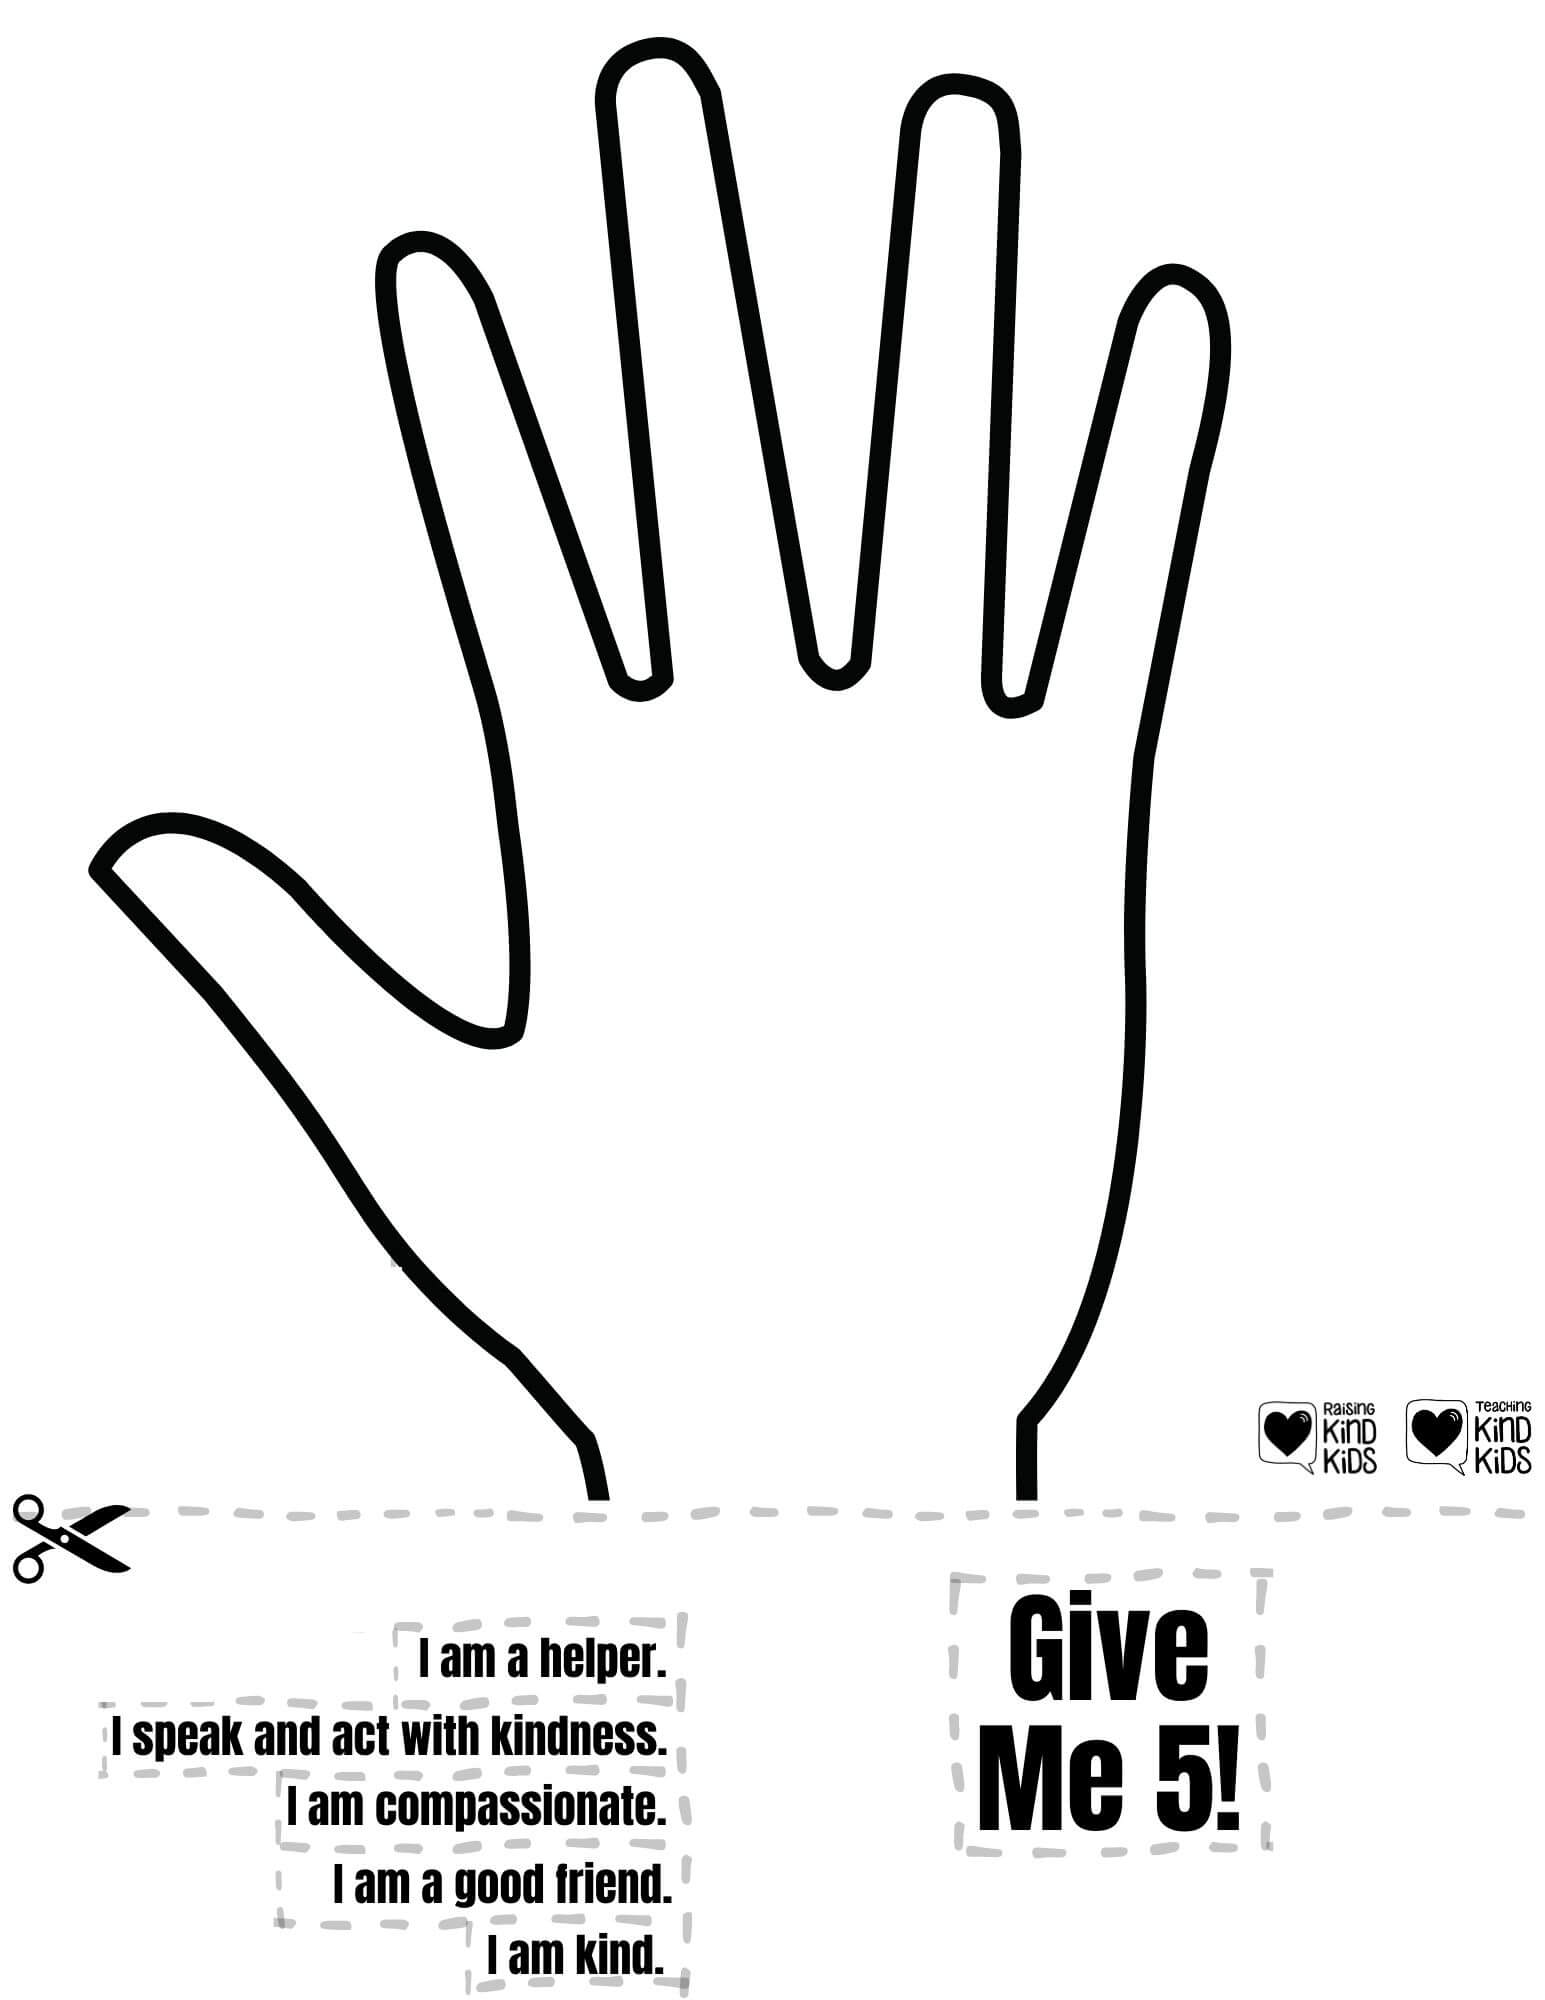 This Give Me 5! Kindness activity for kids is a great way for students to internalize what they need to do to be a kind person. It includes positive affirmations for kids to set clear expectations of what they need to do to show more compassion. It's a great for sel curriculum and character education.